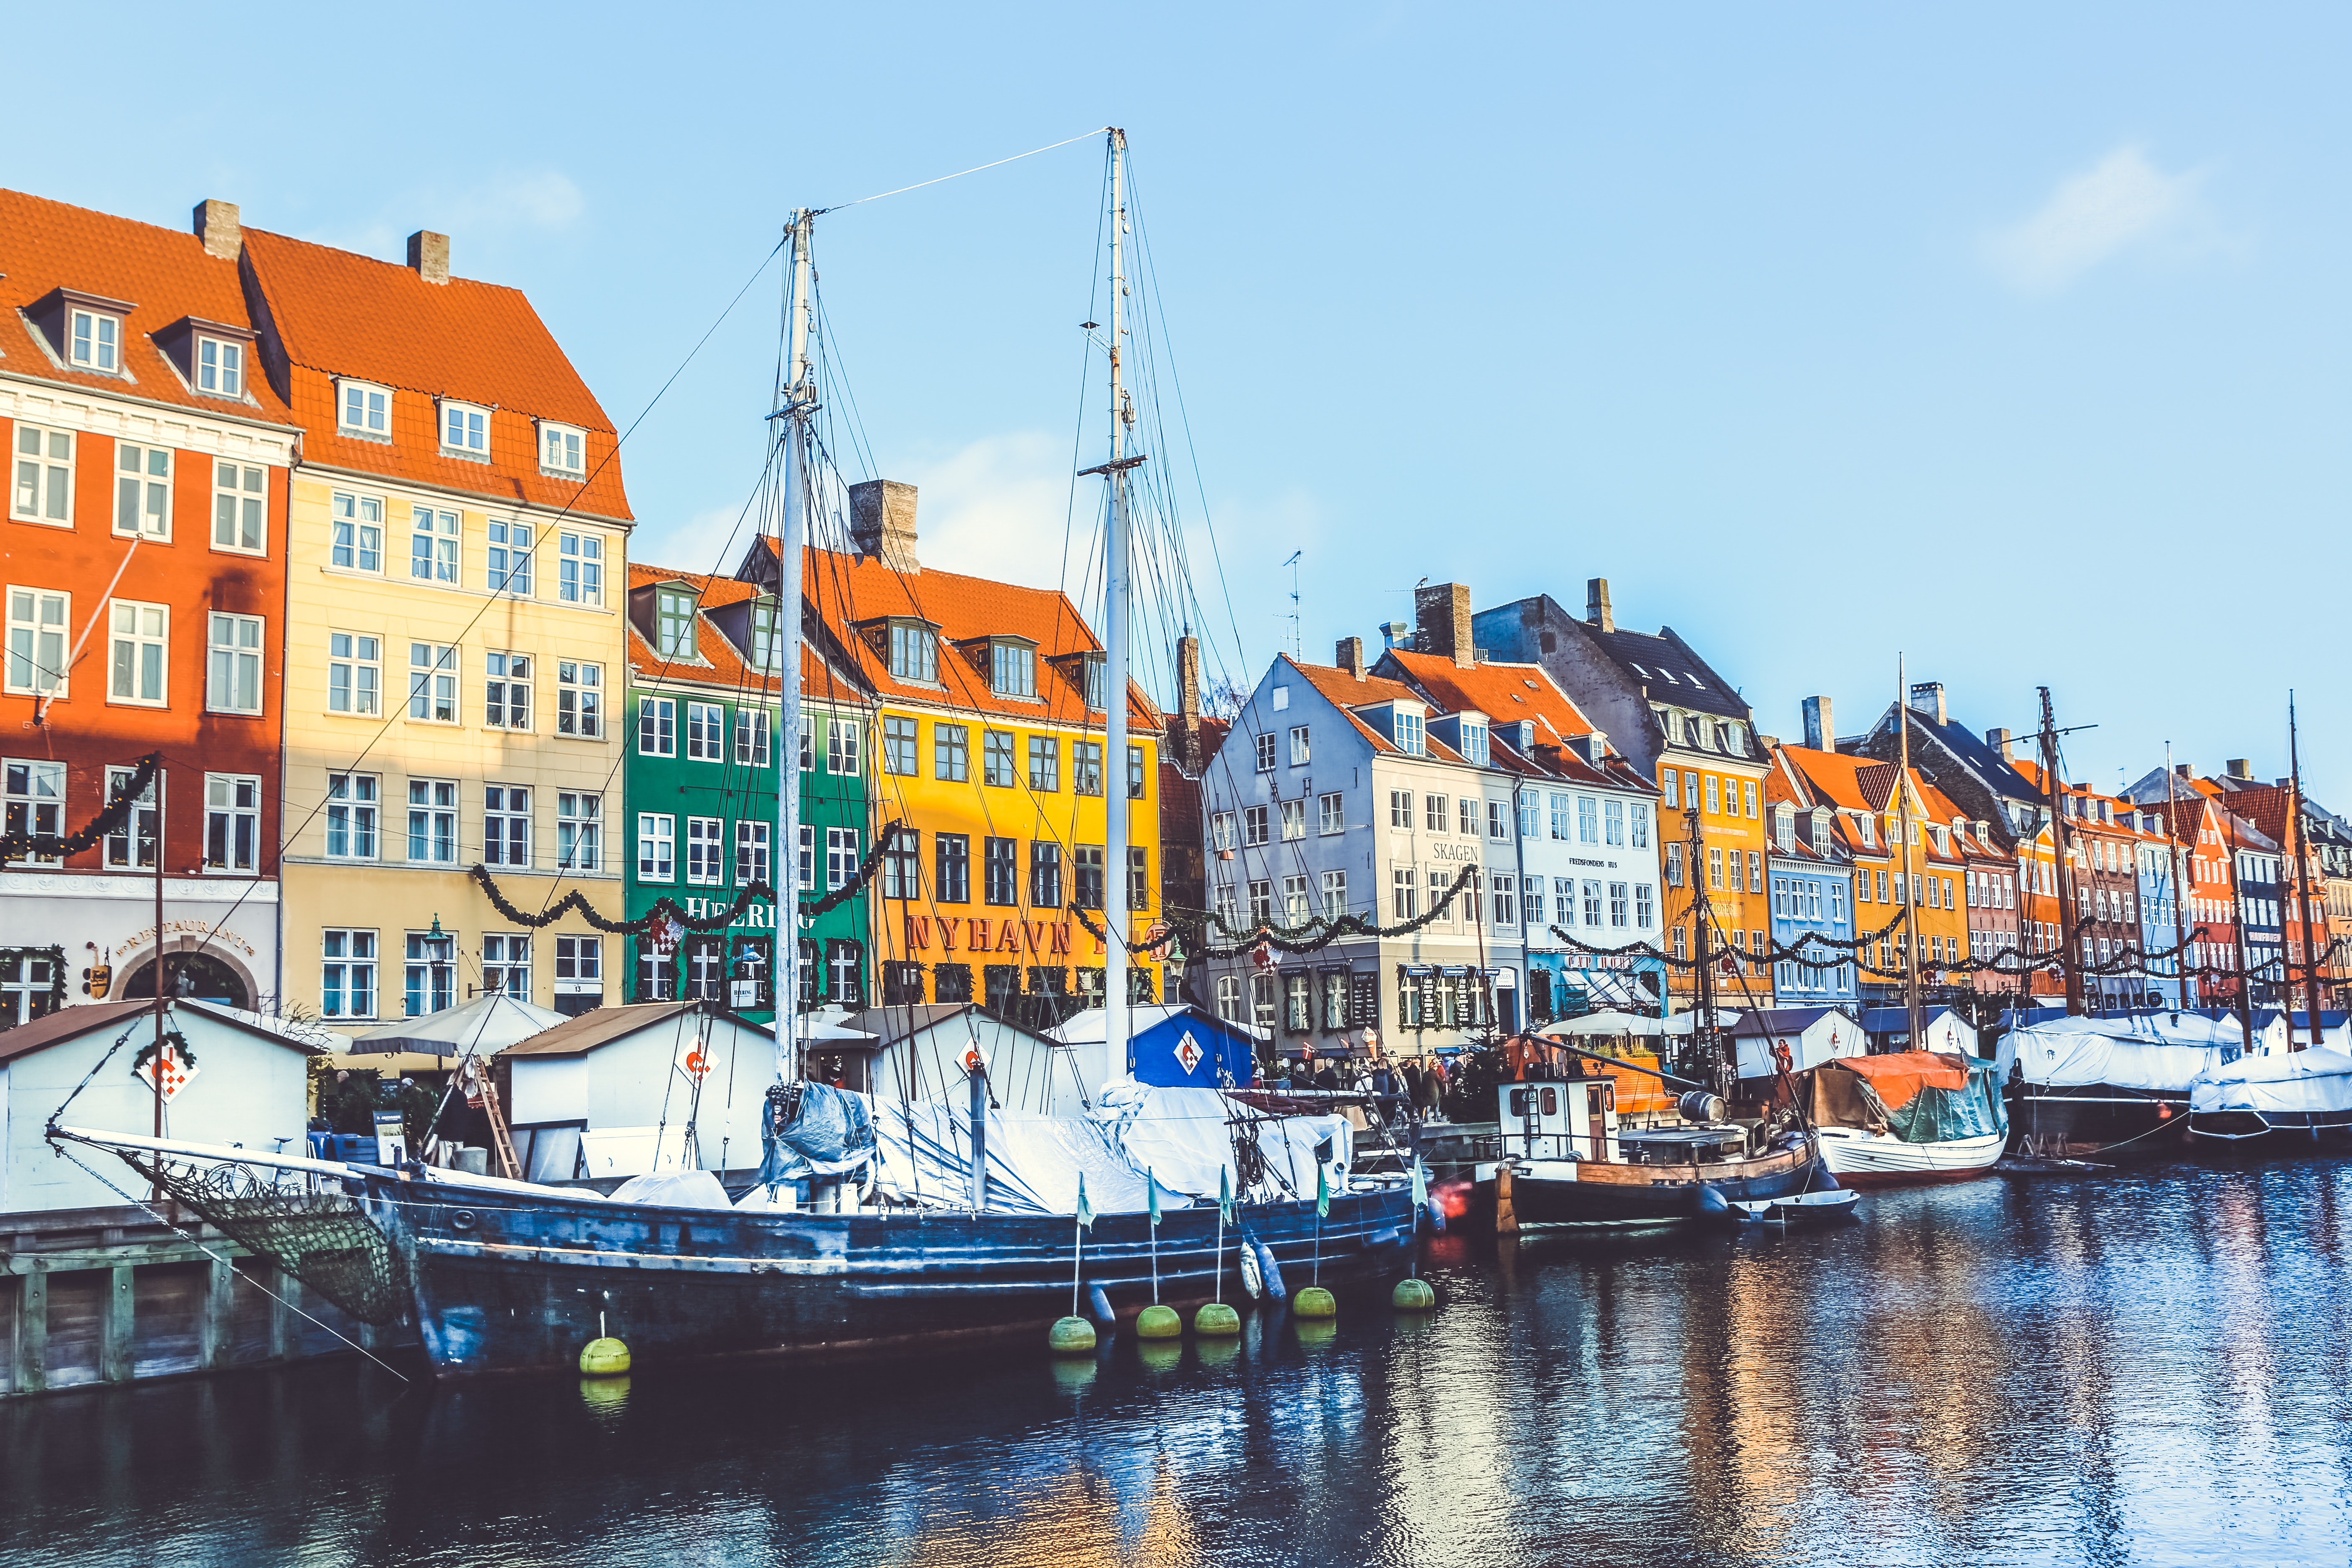 Tour for internationals with local students through Copenhagen - experience Copenhagen by boat and foot